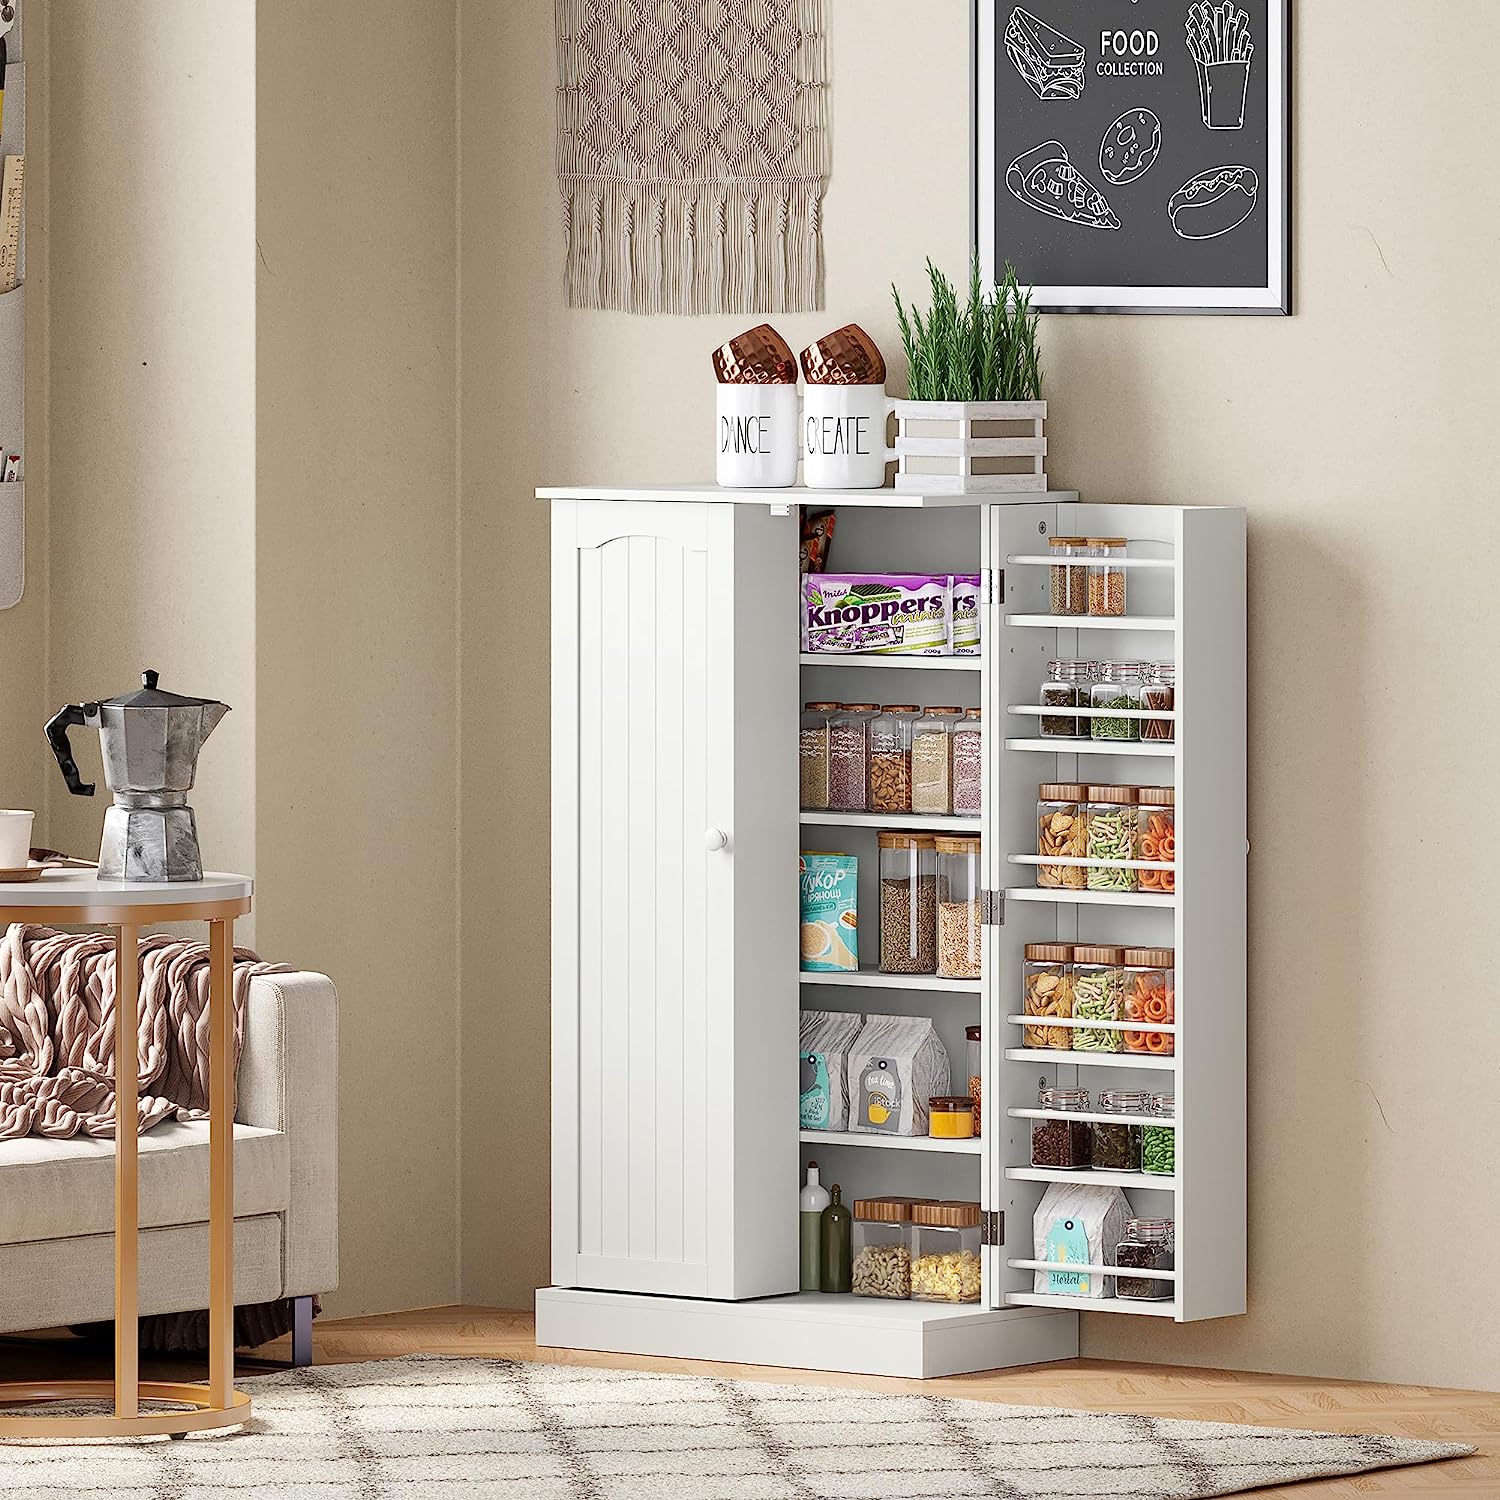 The 15 Best Kitchen Storage Shelves for Your Essentials | Storables